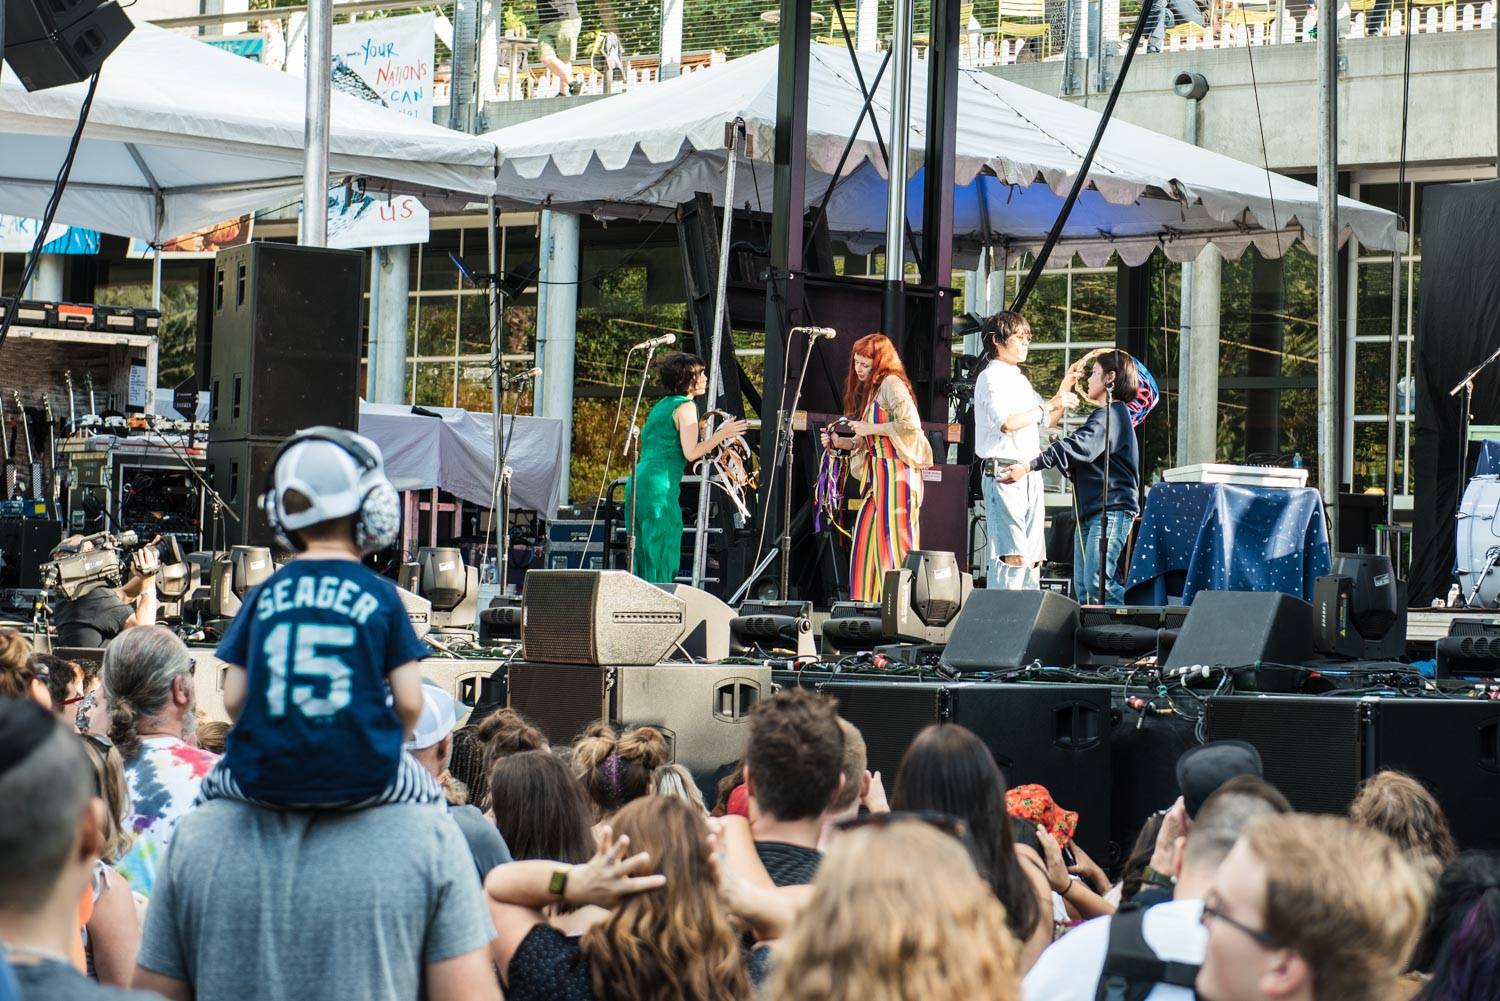 Superorganism at the Bumbershoot Music Festival 2018 - Day 2. Sept 1 2018. Pavel Boiko photo.